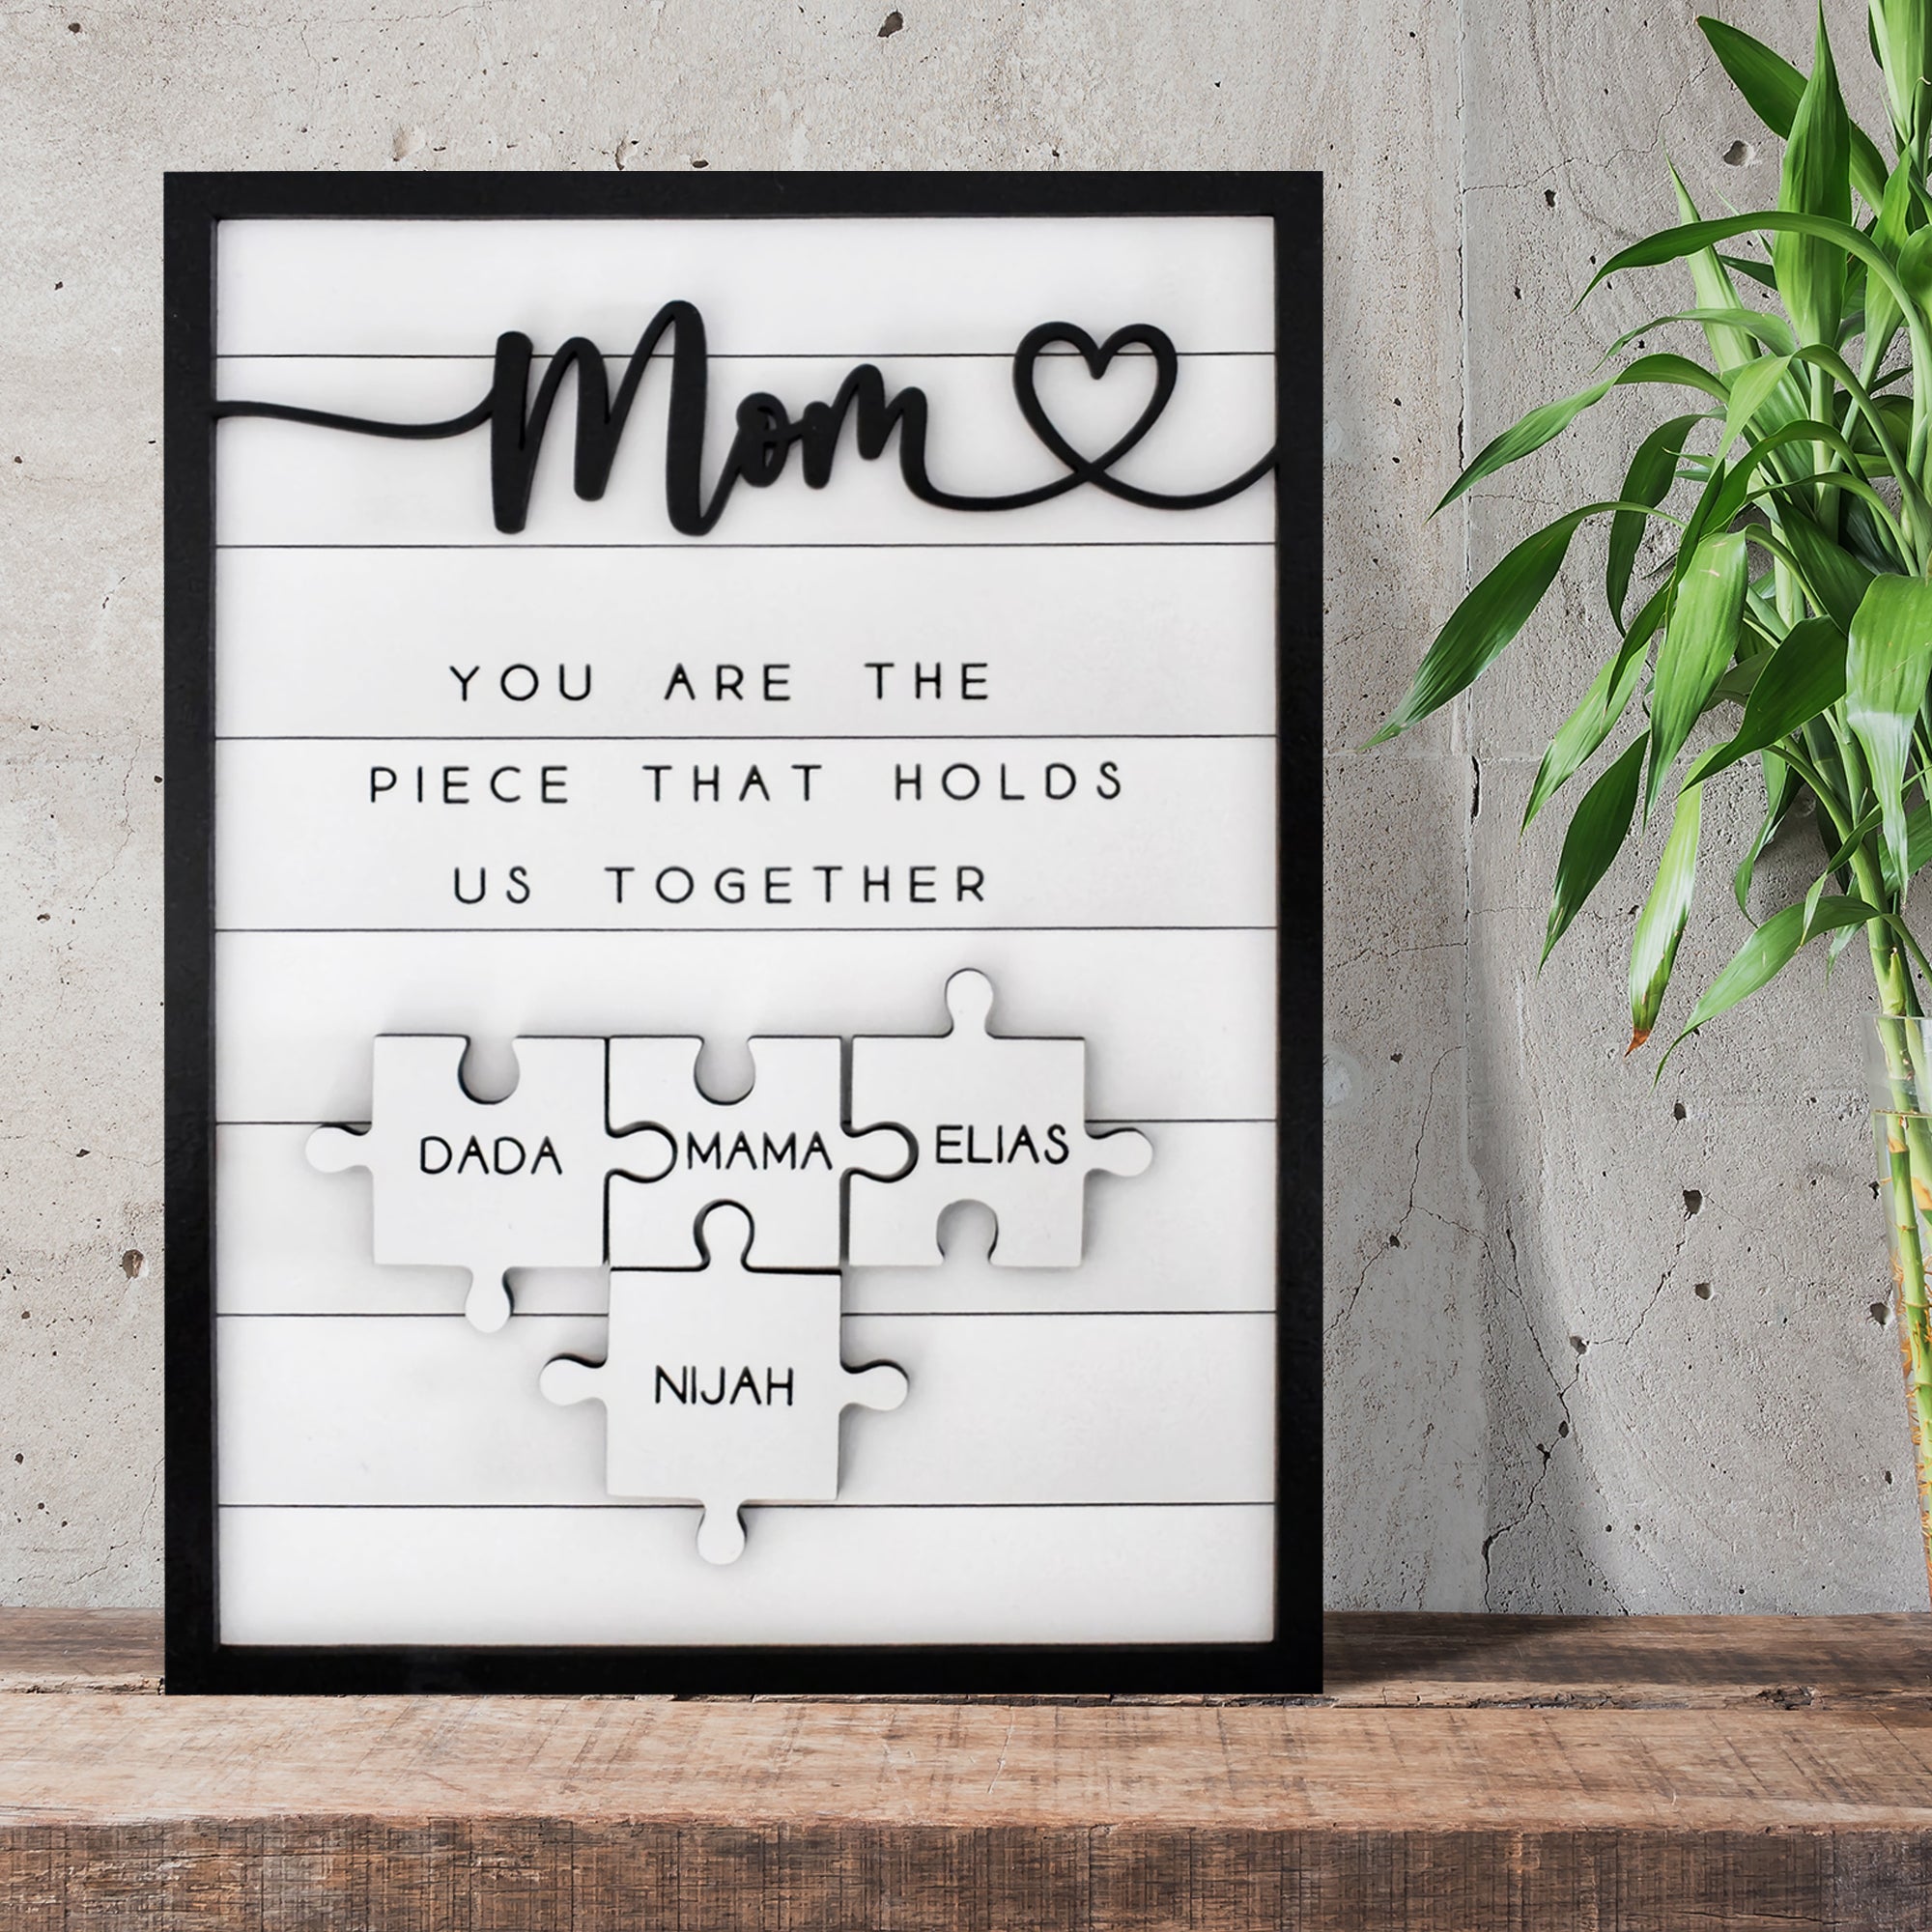 Mom Puzzle Piece Picture Pillow, Mother's Day Pillows, Mom's Birthday  Present, Piece That Holds Us Together - Best Personalized Gifts For Everyone